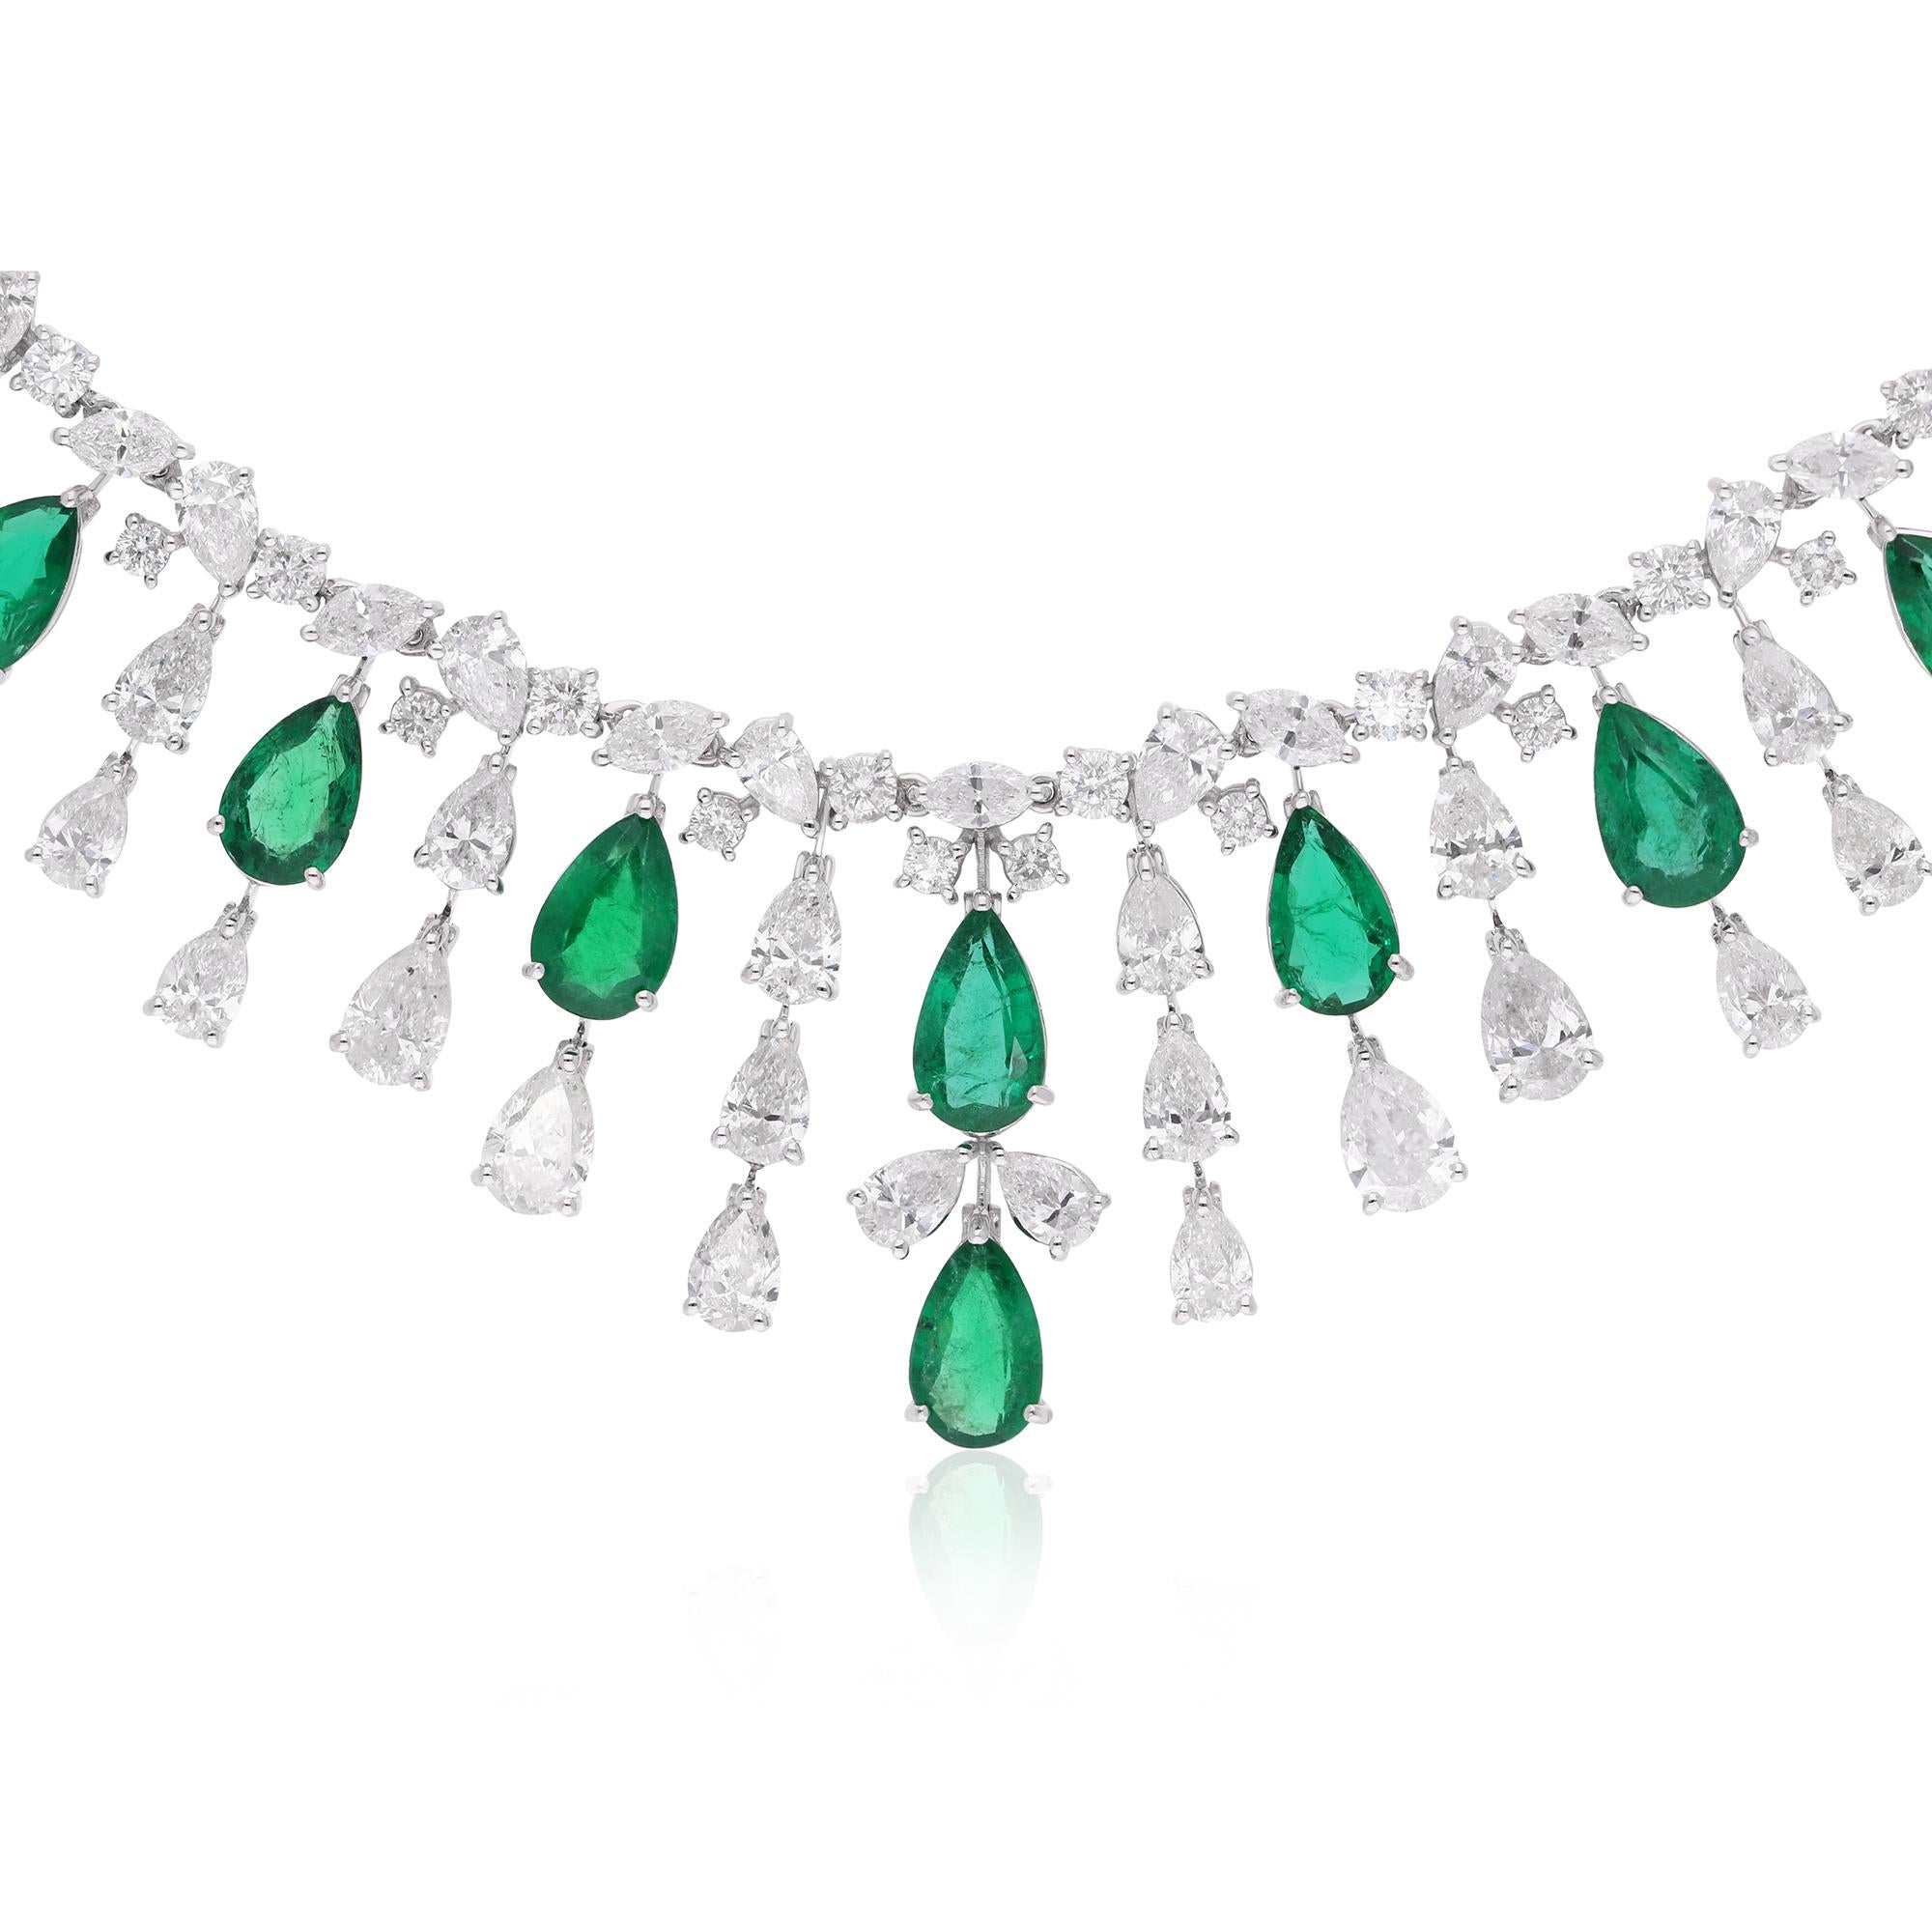 Crafted with meticulous attention to detail, the necklace is fashioned in 14 Karat White Gold, adding a timeless elegance to the design. The lustrous white gold setting provides the perfect backdrop for the emerald and diamonds, creating a